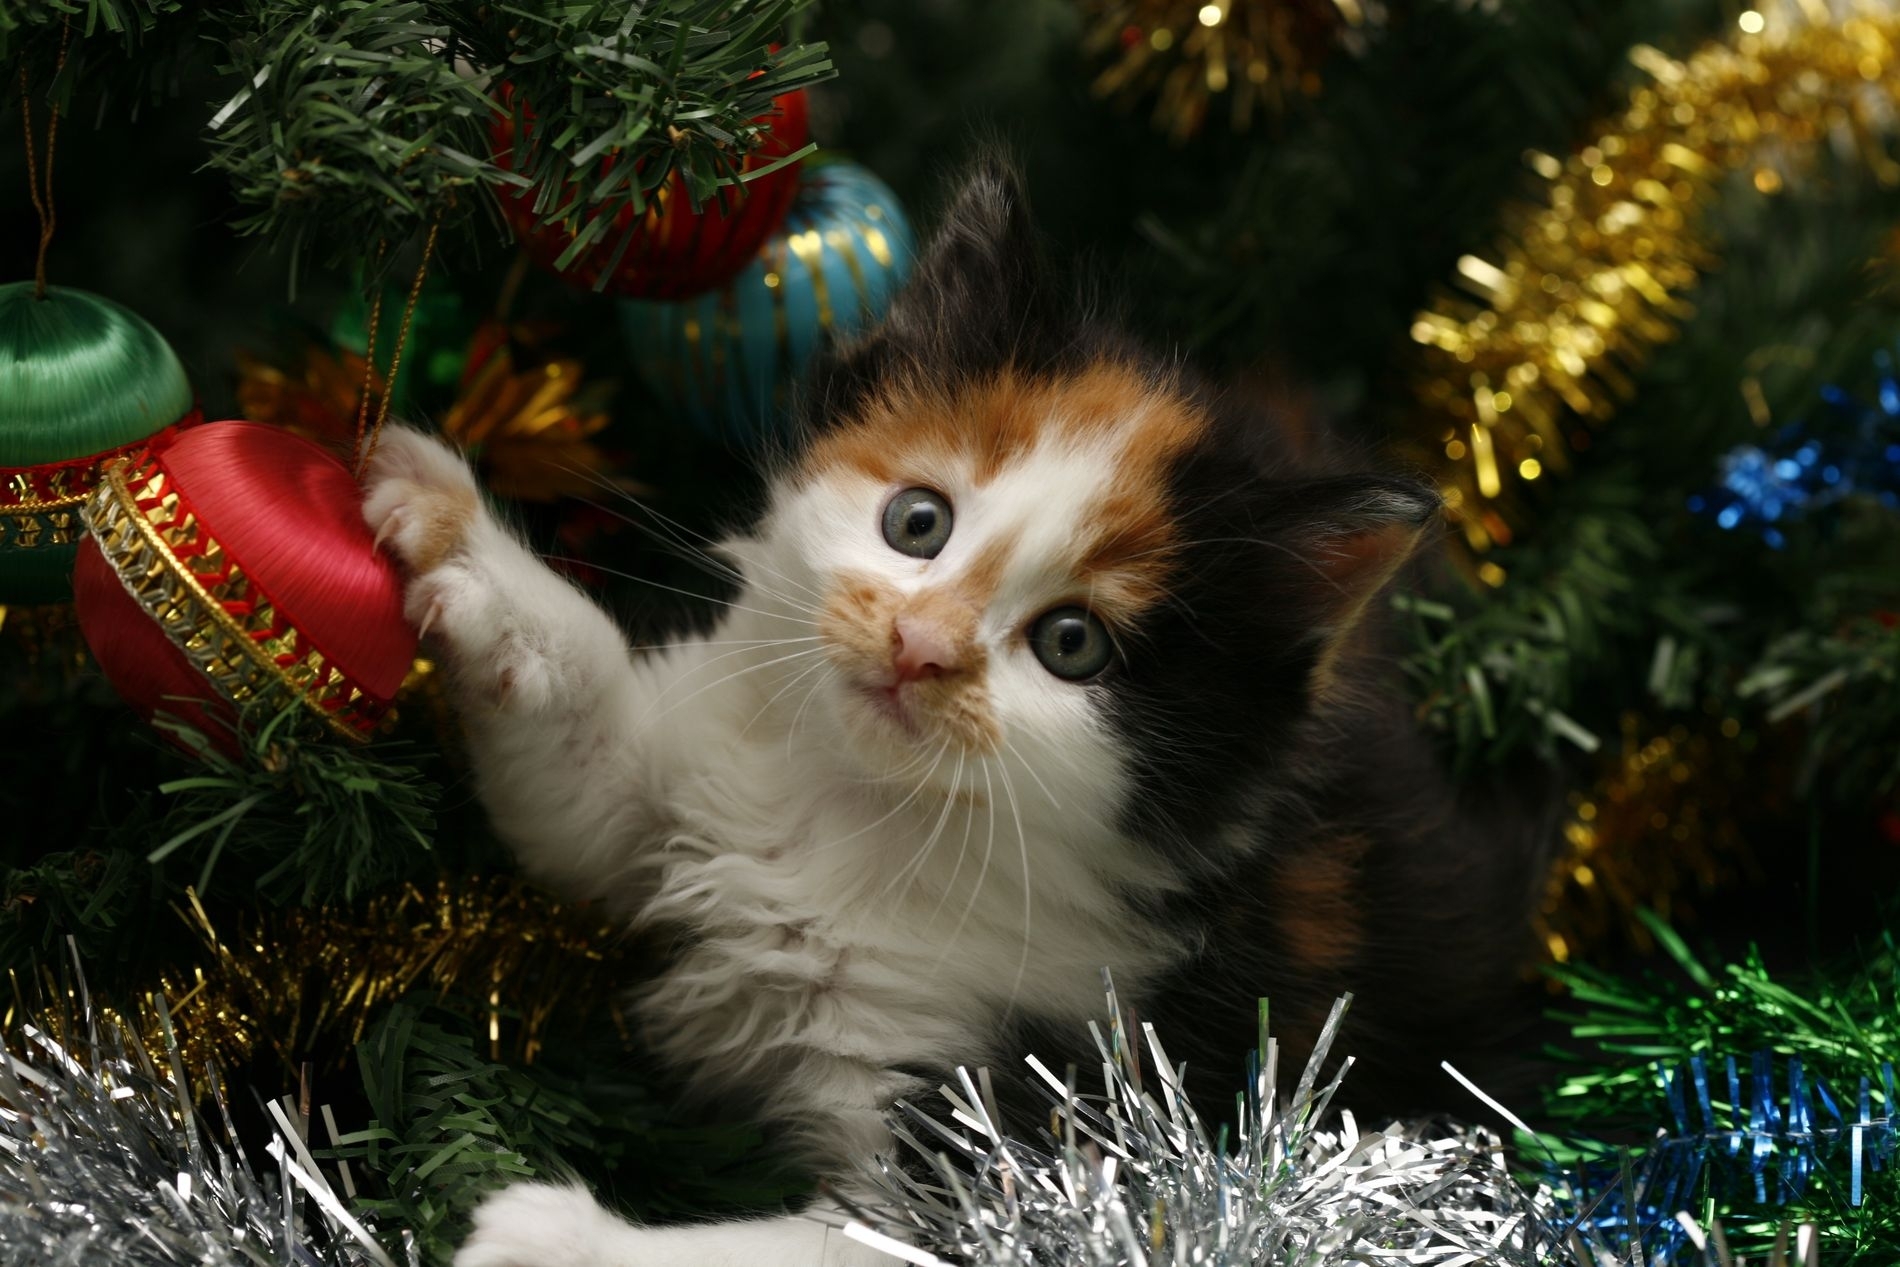 spotted, animals, christmas tree toys, kitty, kitten, muzzle, spotty, christmas, christmas decorations, christmas tree, tinsel